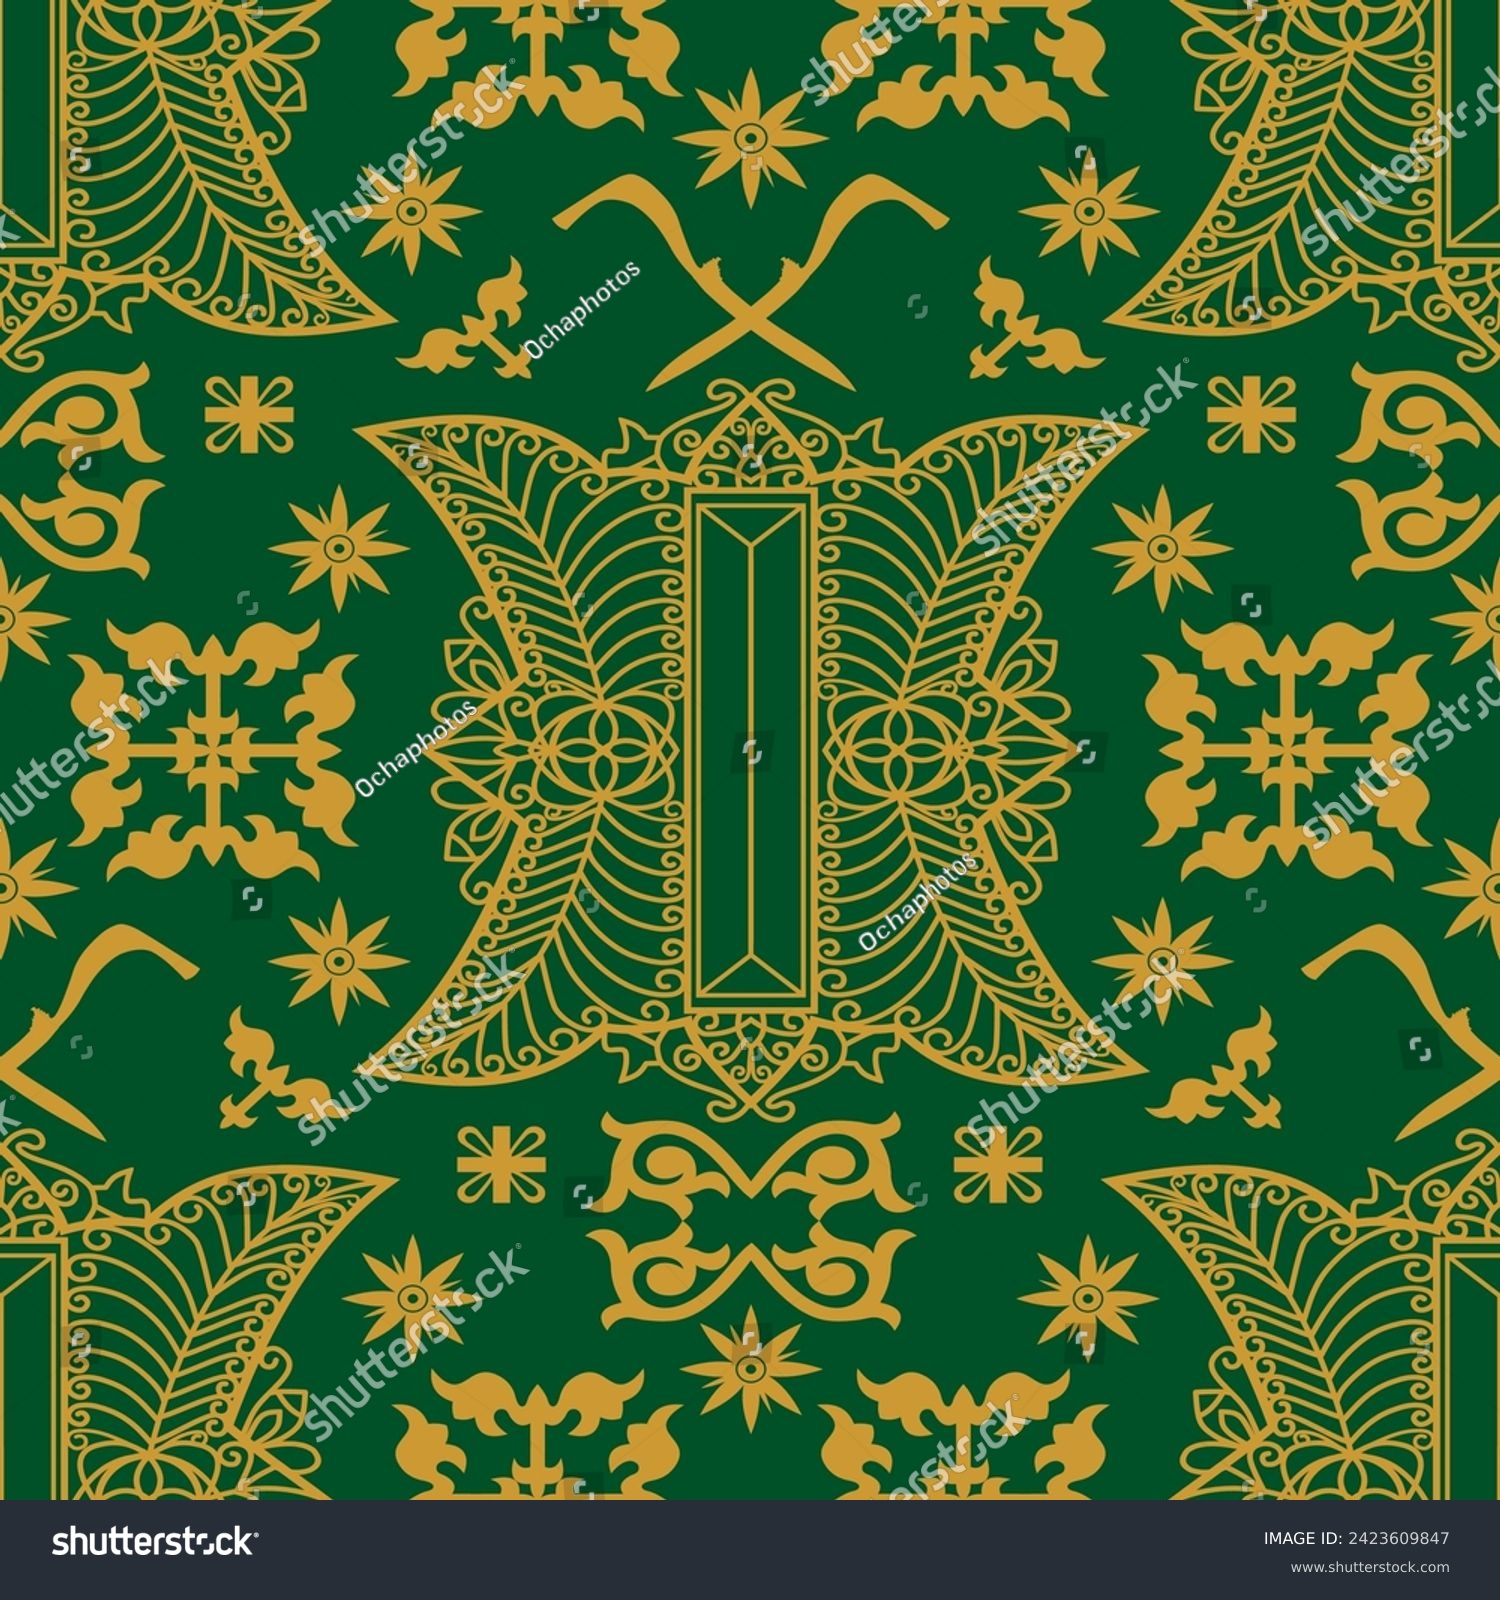 SVG of Typical Acehnese batik. Traditional art patterns from the province of Aceh, Indonesia, with a dark green background and gold ornaments svg